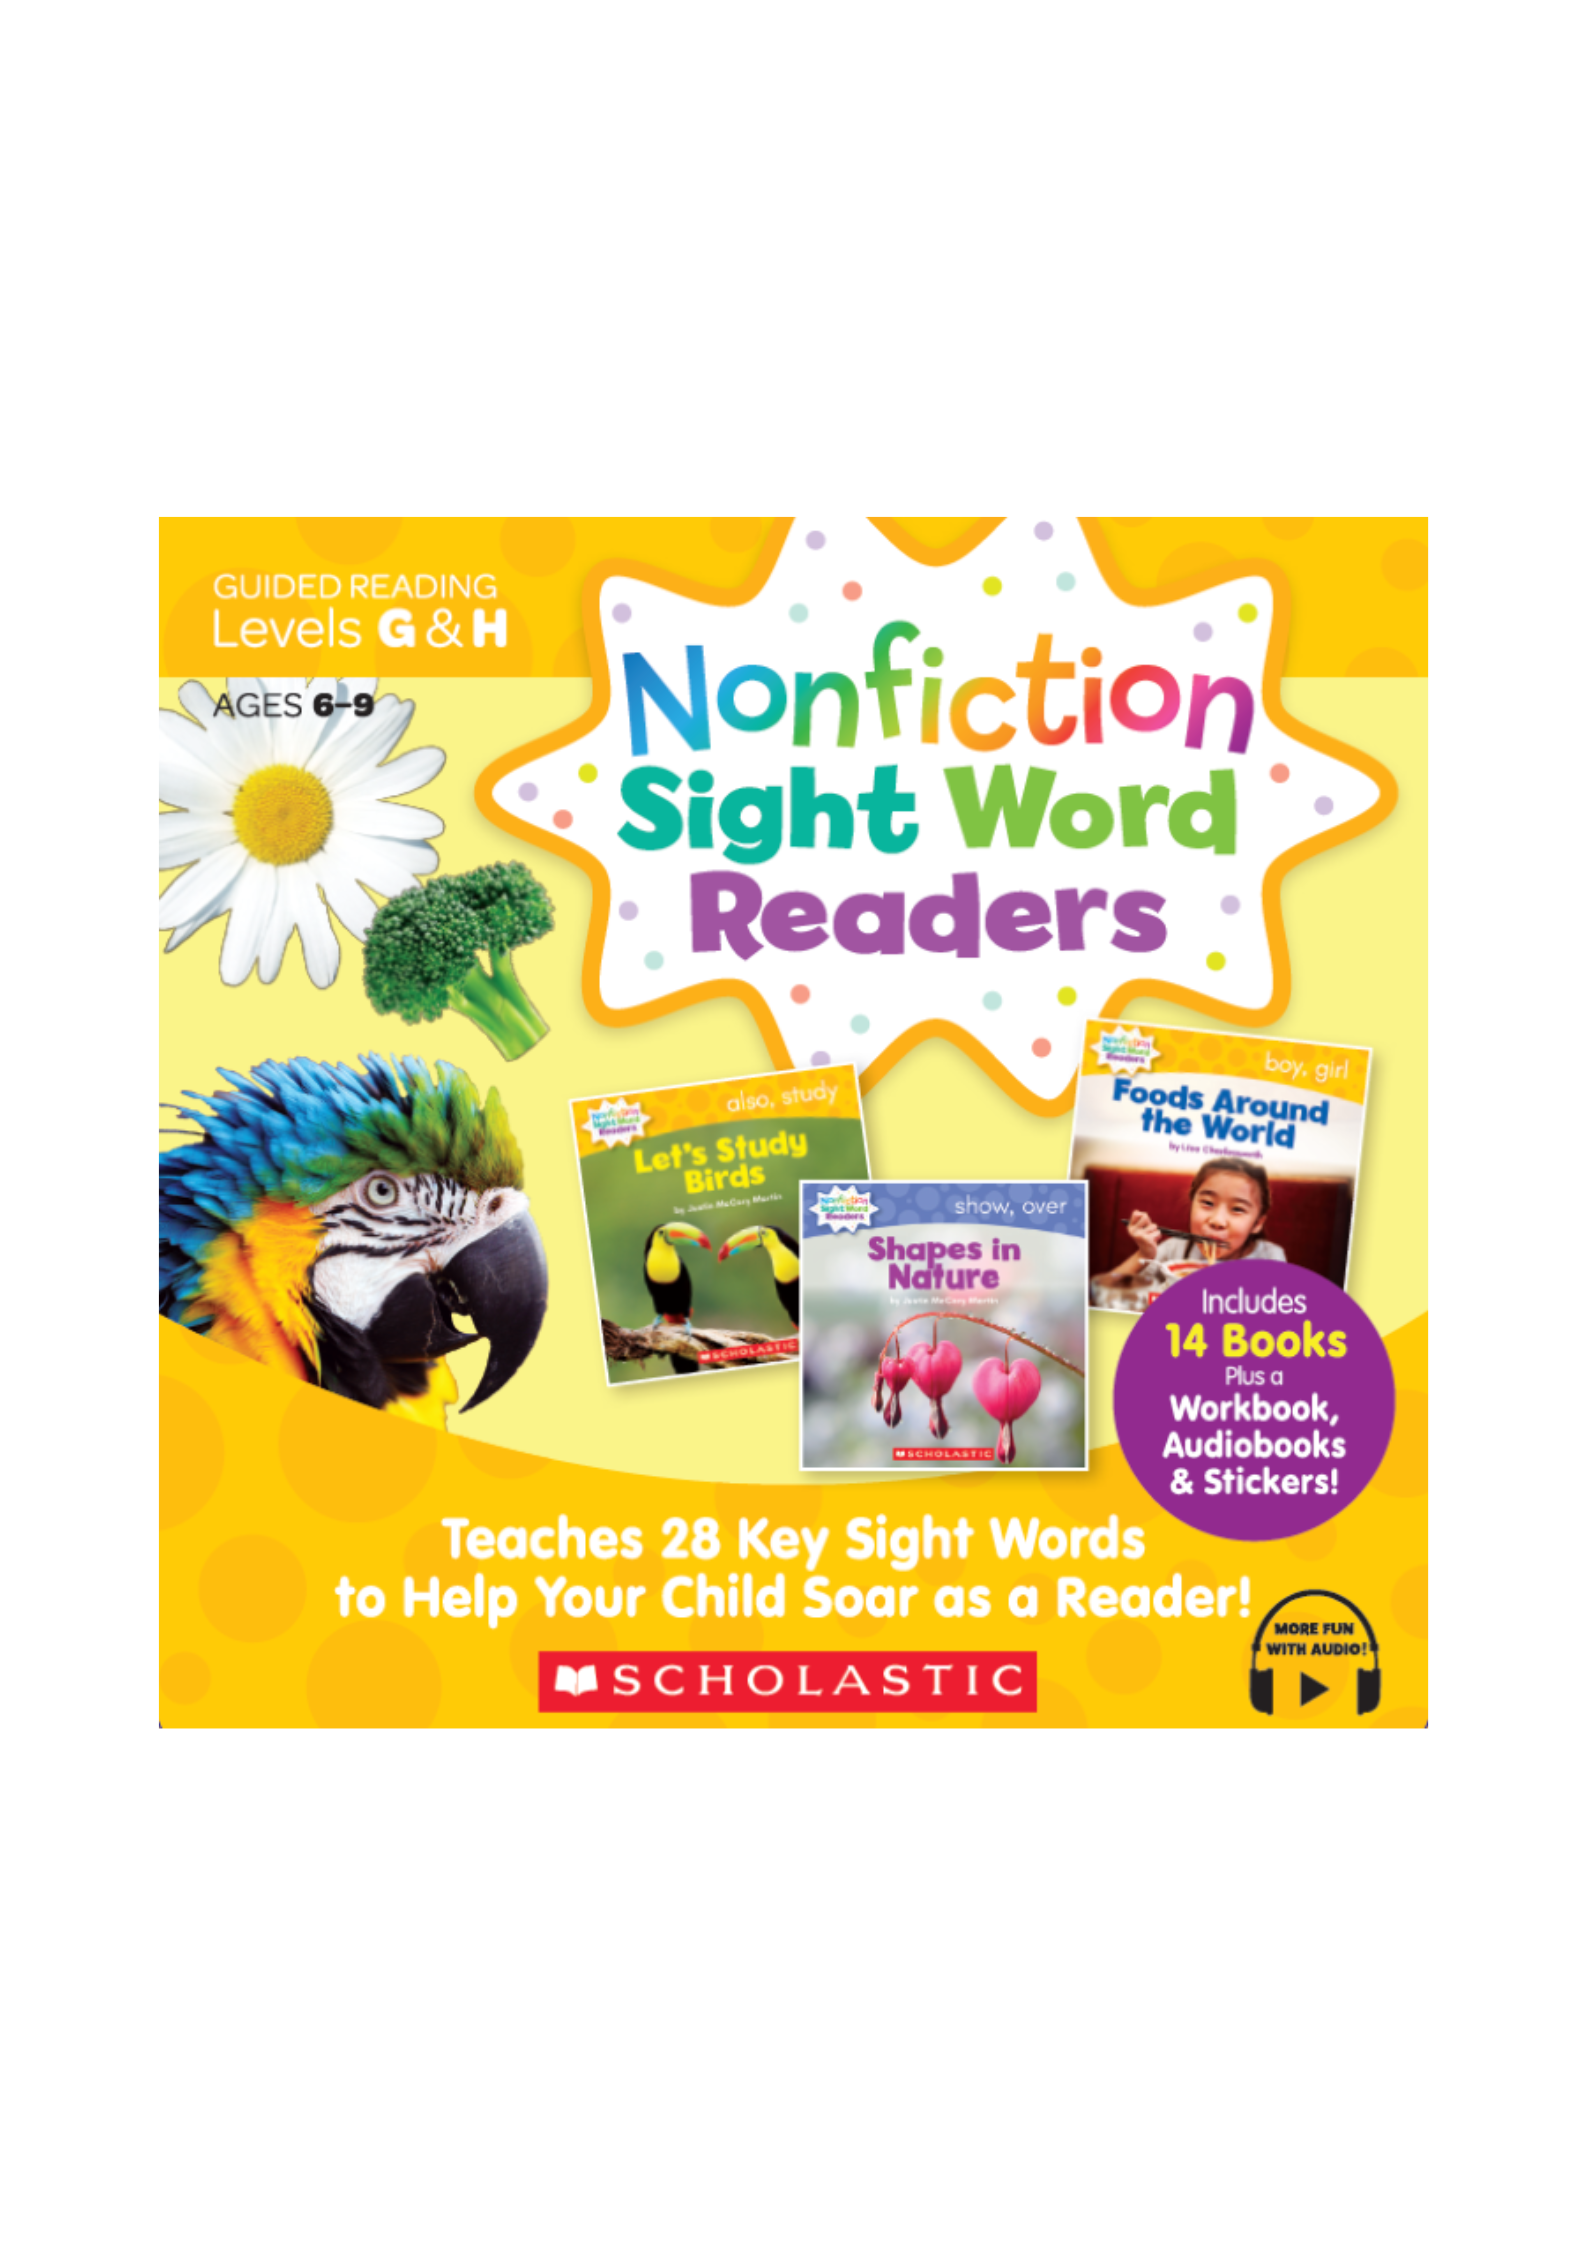 Nonfiction Sight Word Readers Level G & H